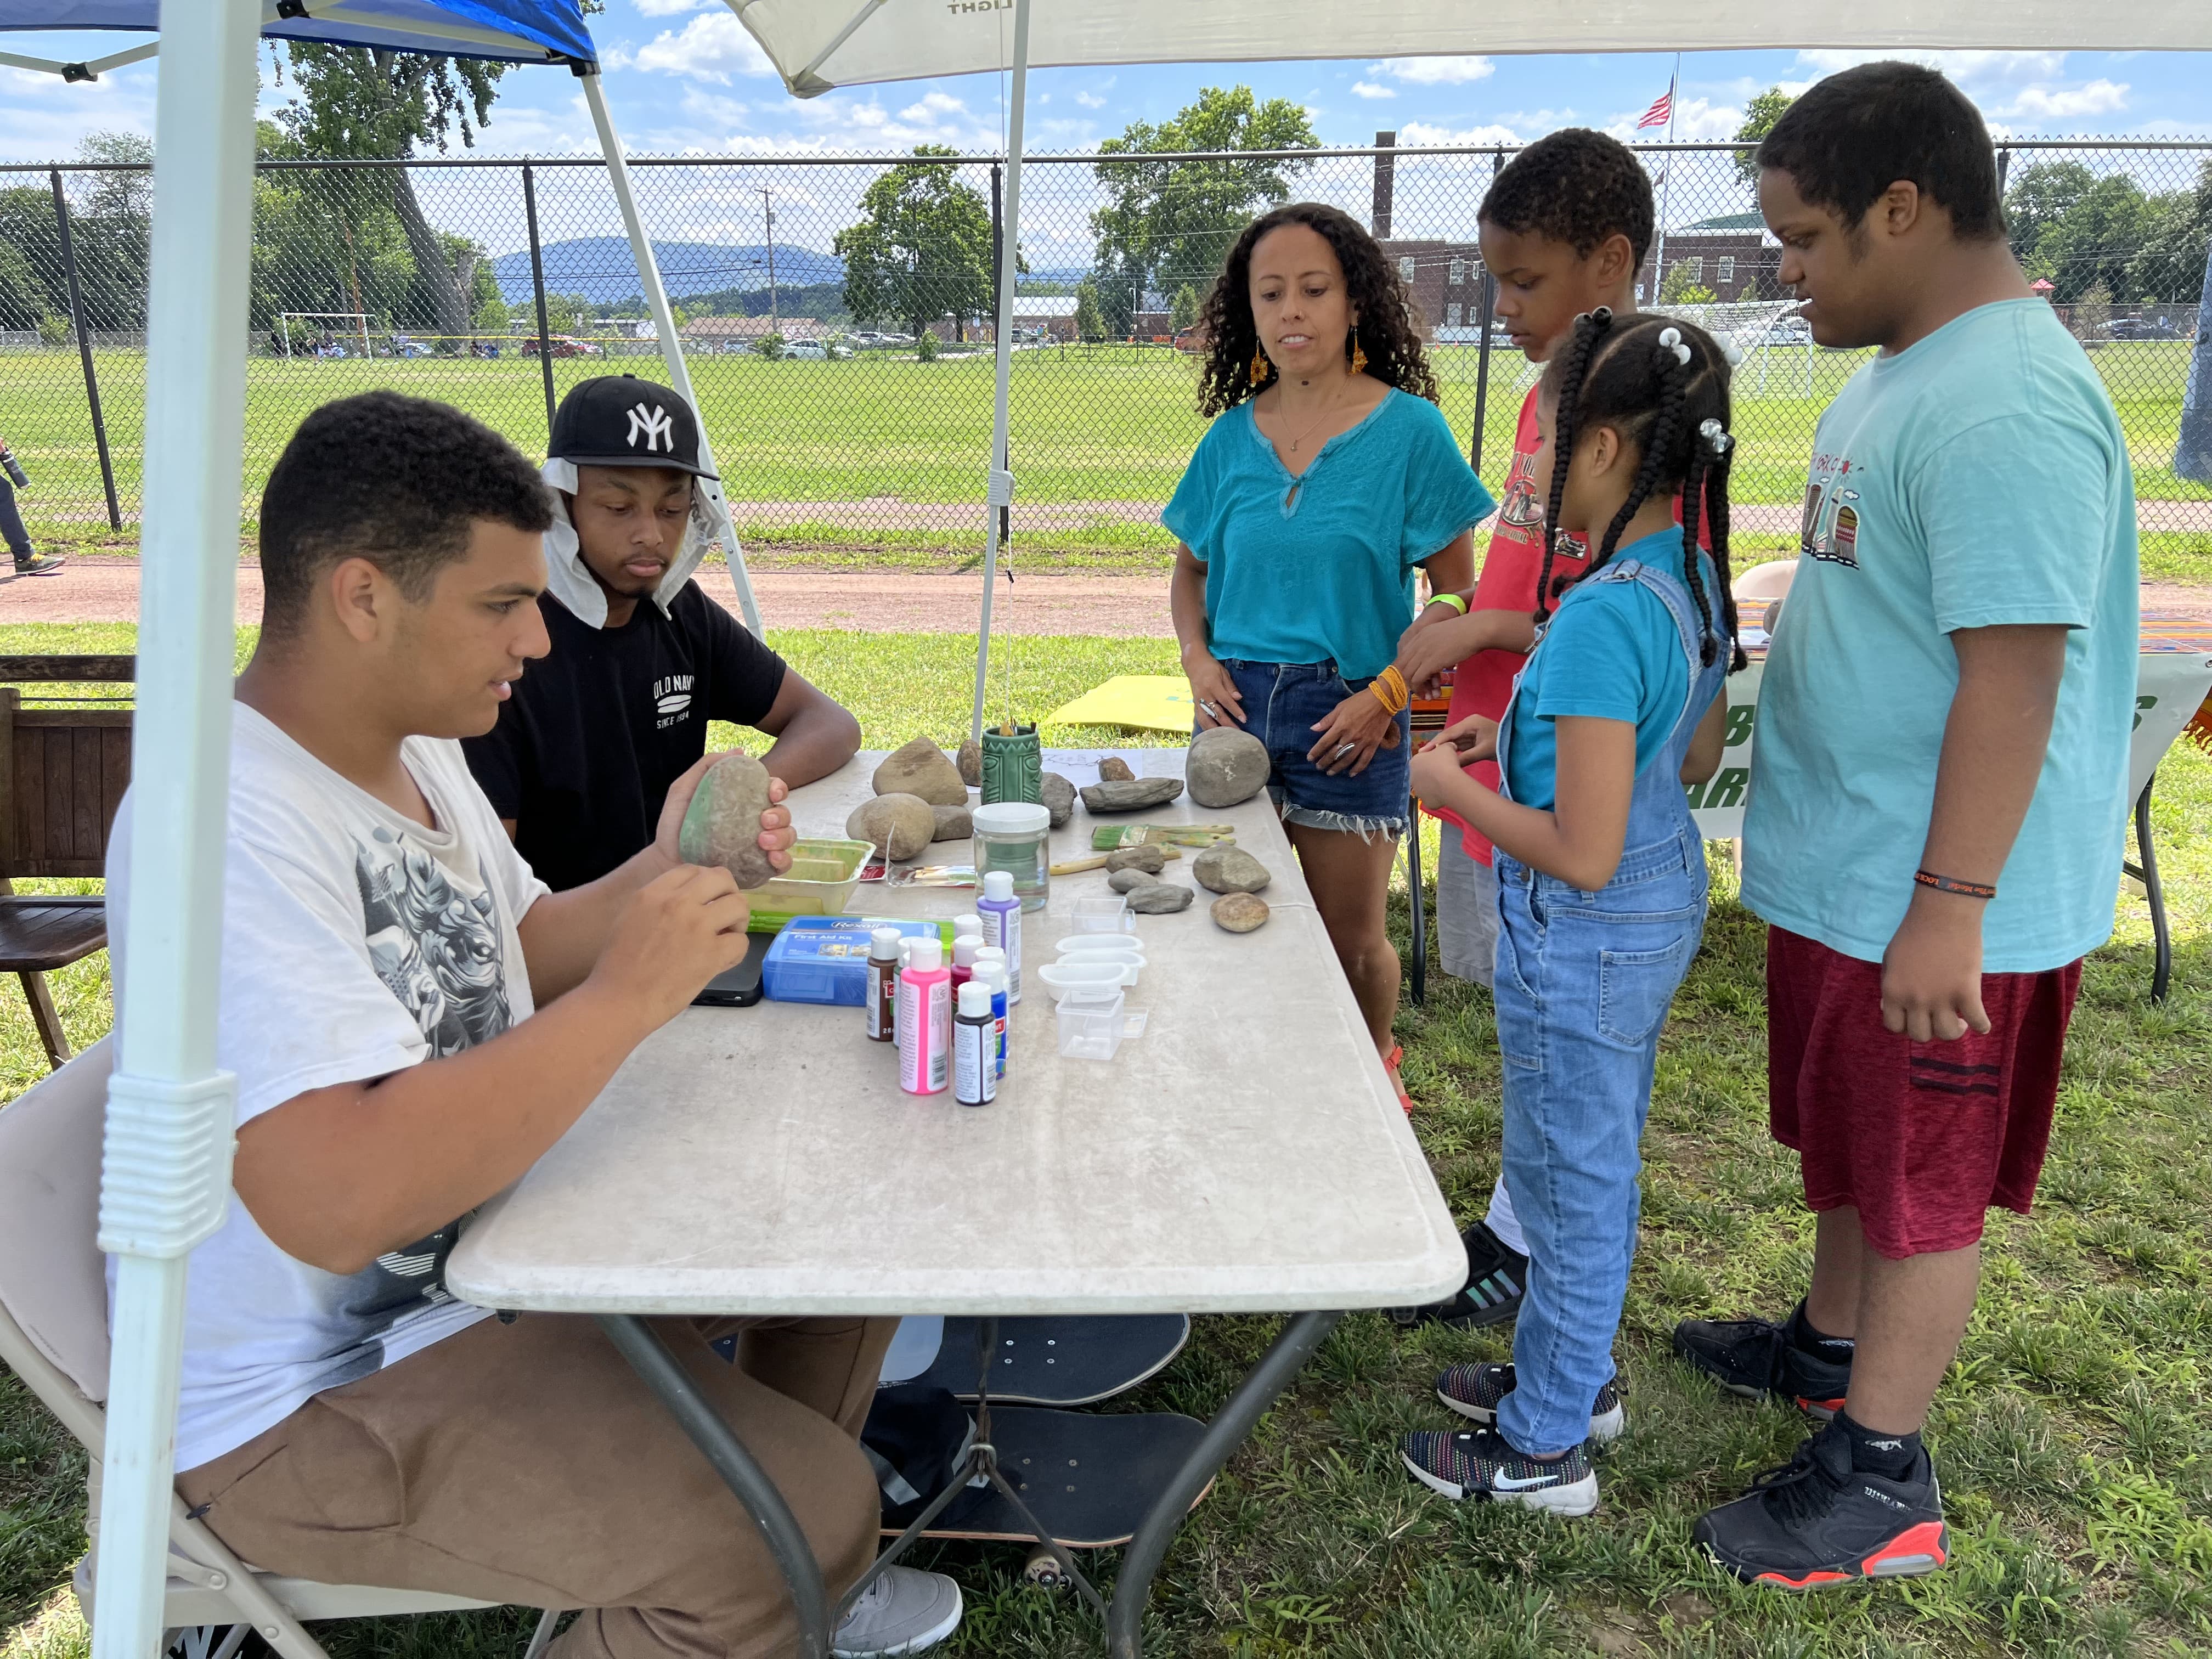 Sanctuary Healing Garden Steward, Betty Bastidas and her youth apprentices painting with community members on tables.